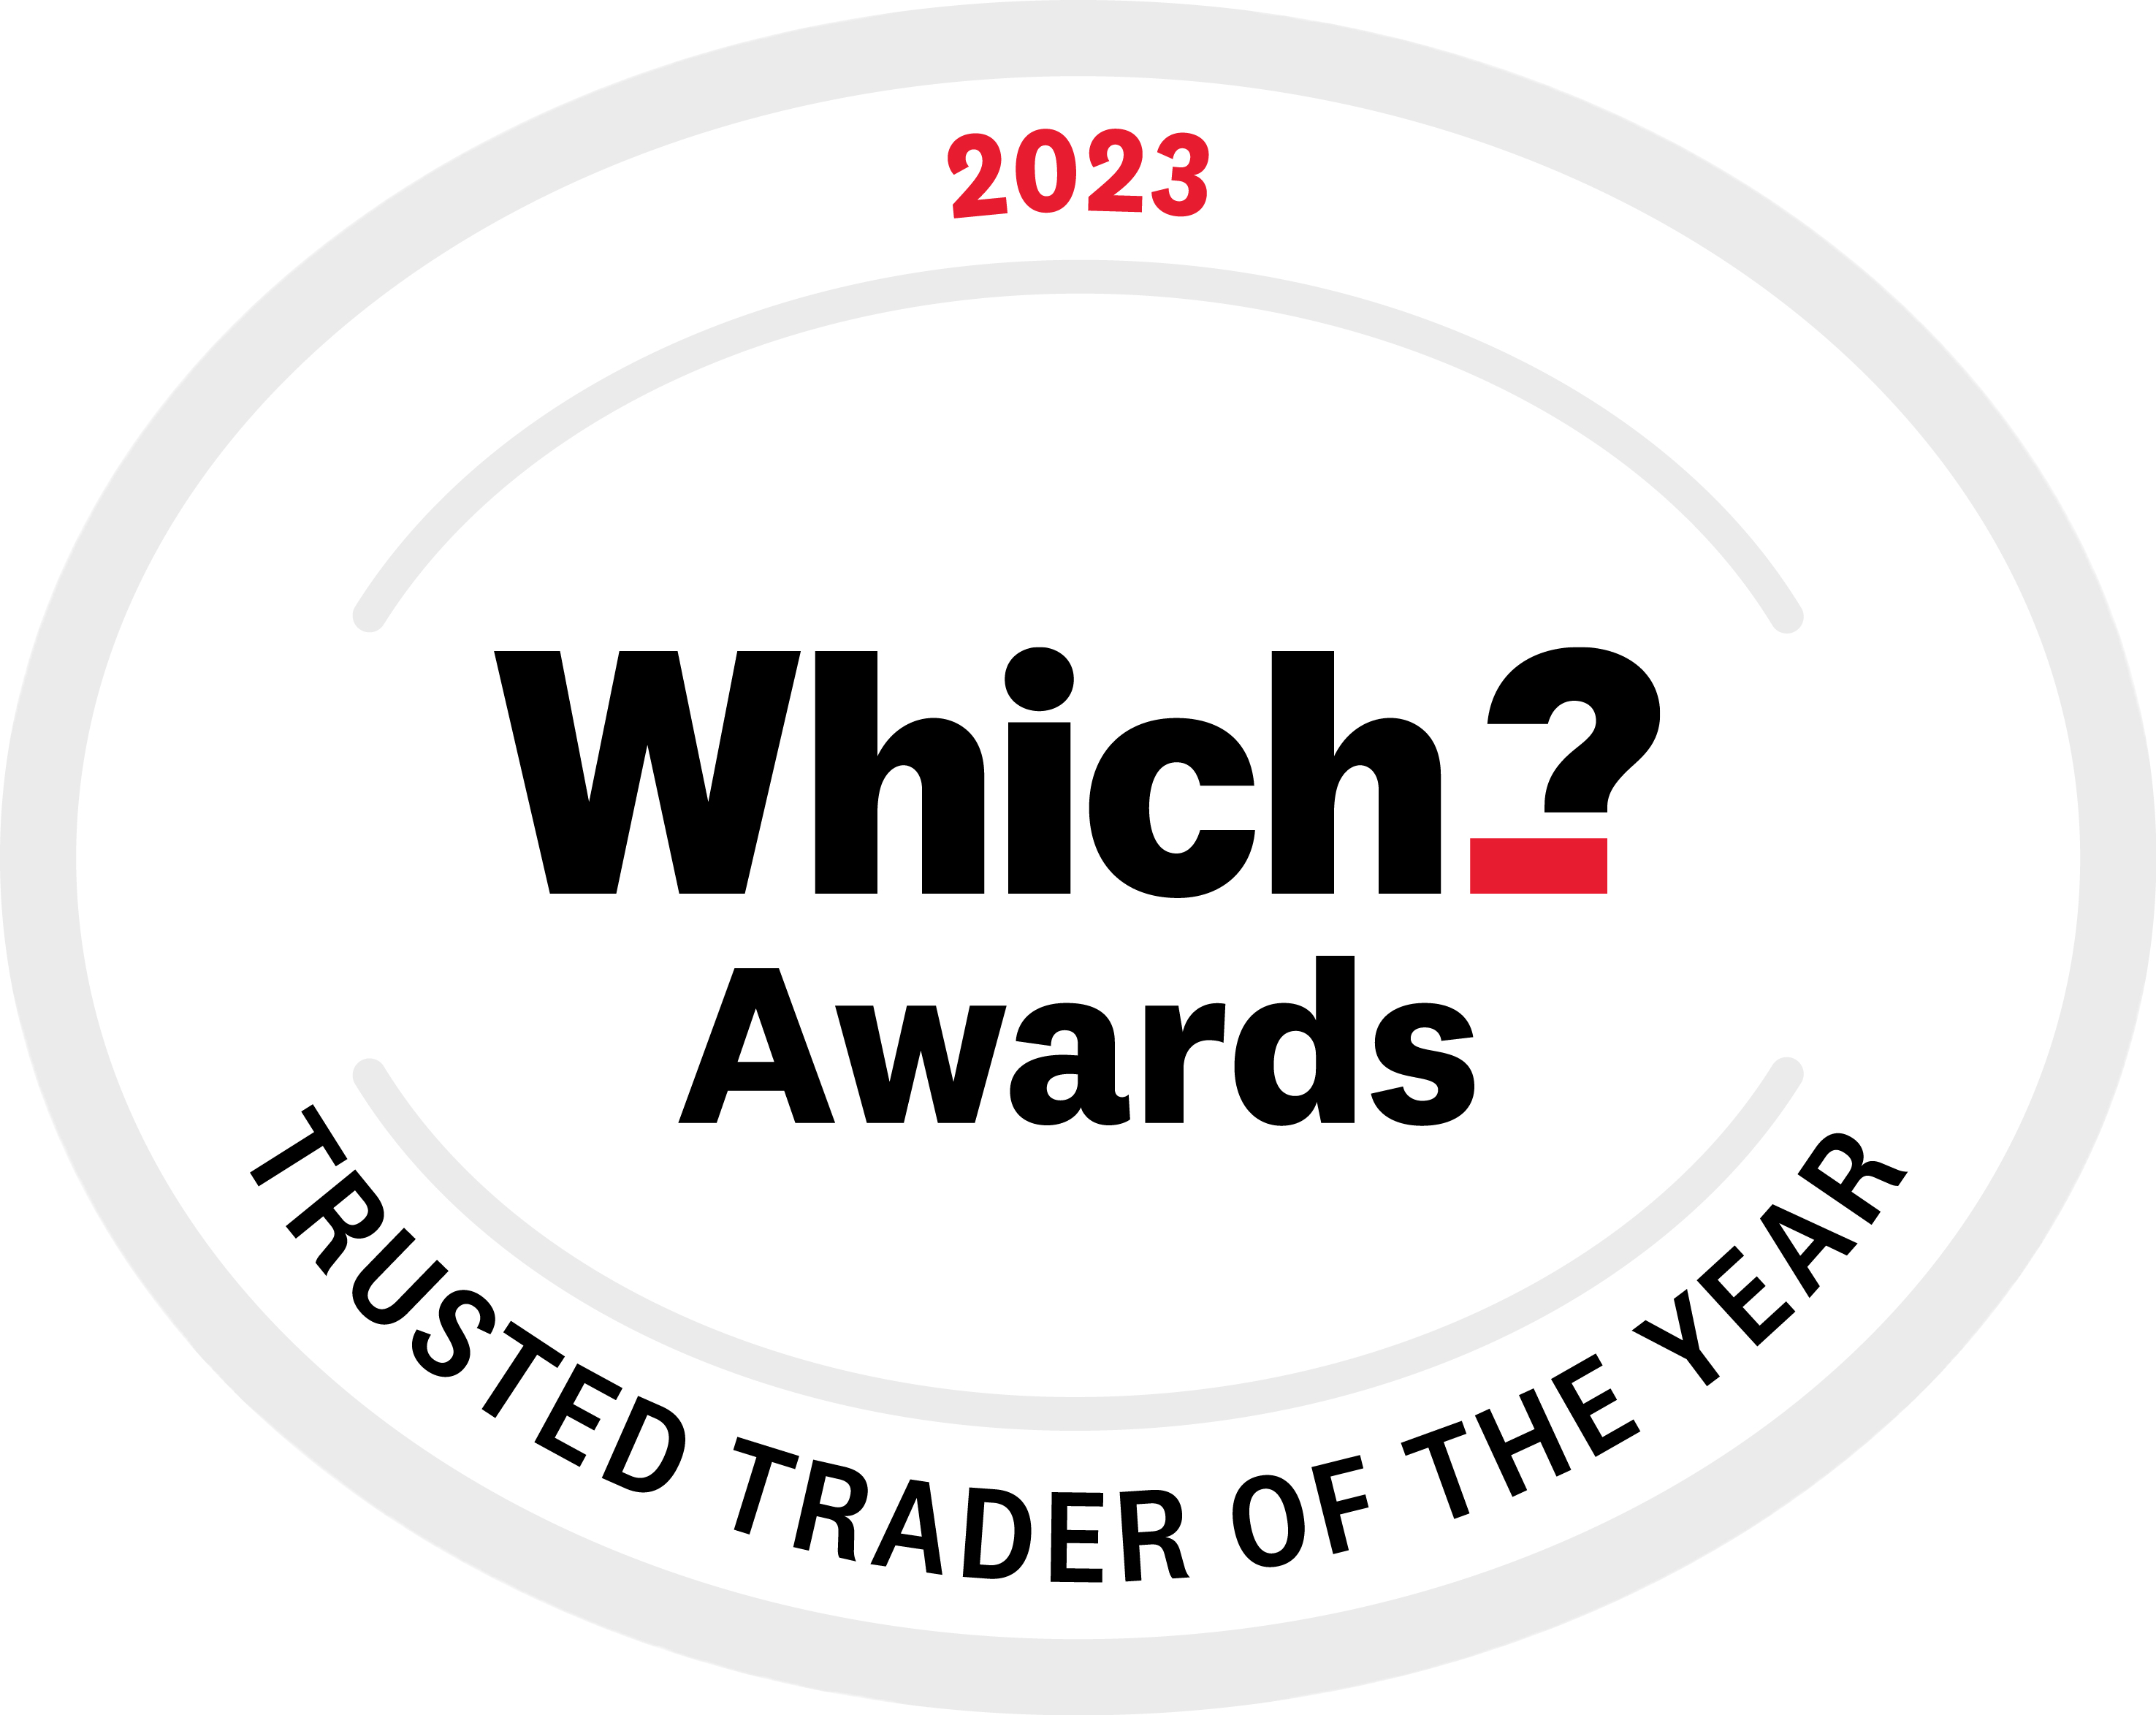 Trusted trader of the year 2023 award